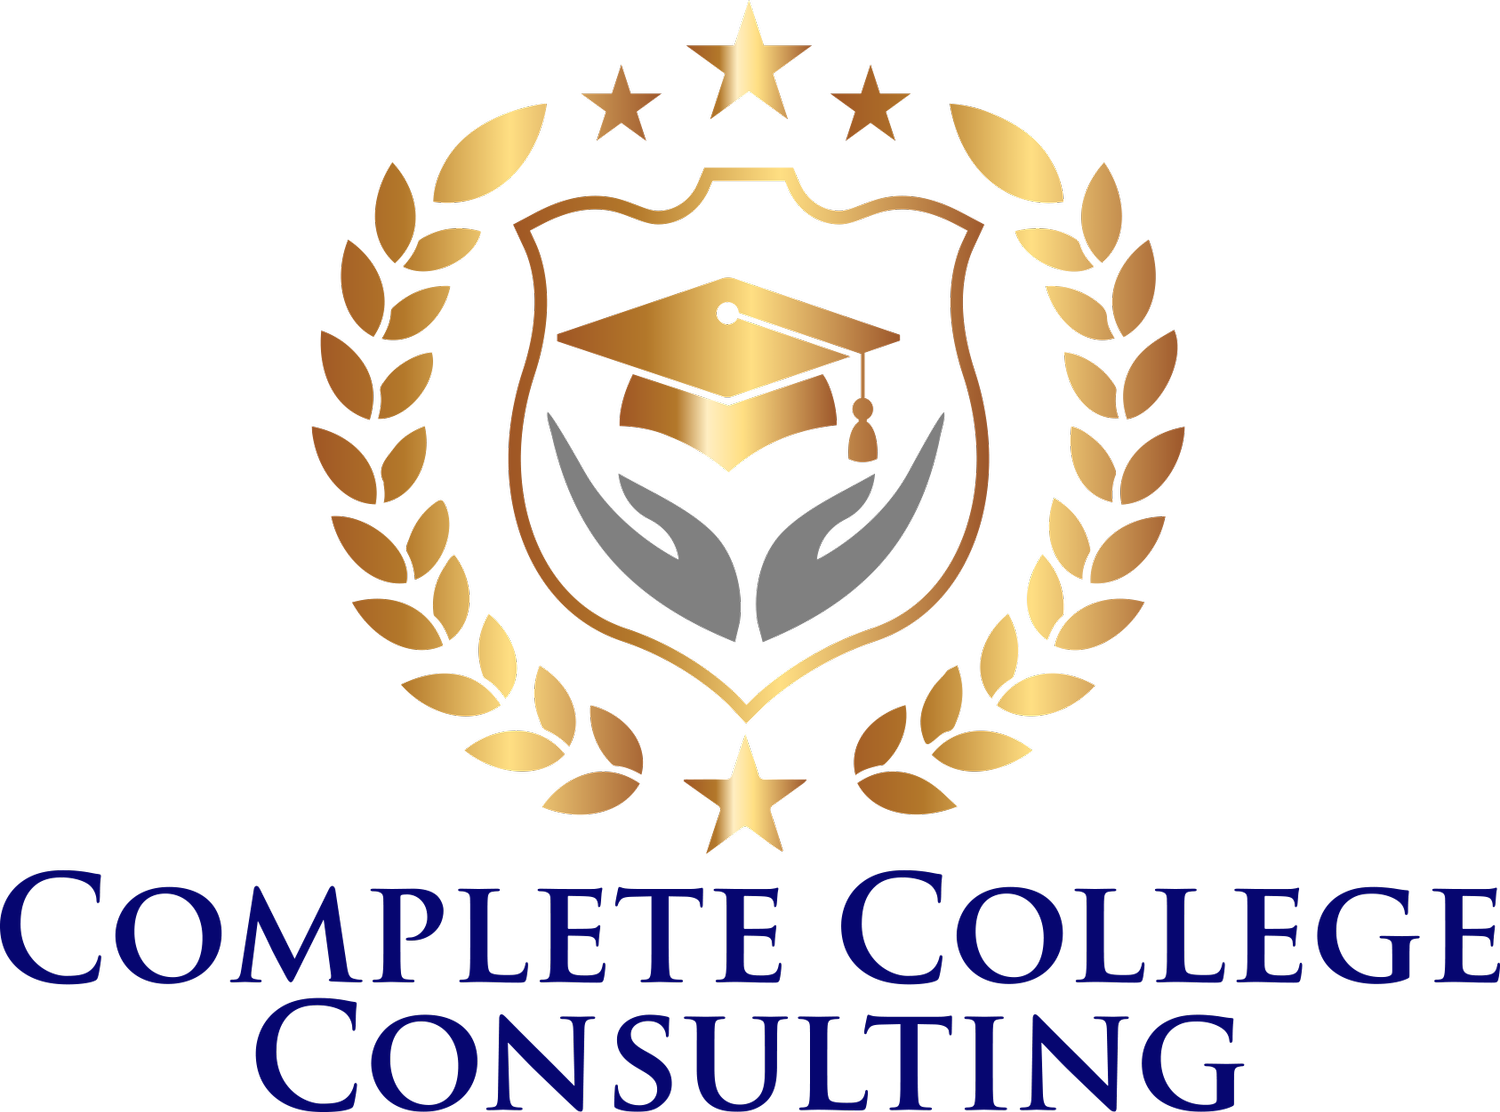 Complete College Consulting